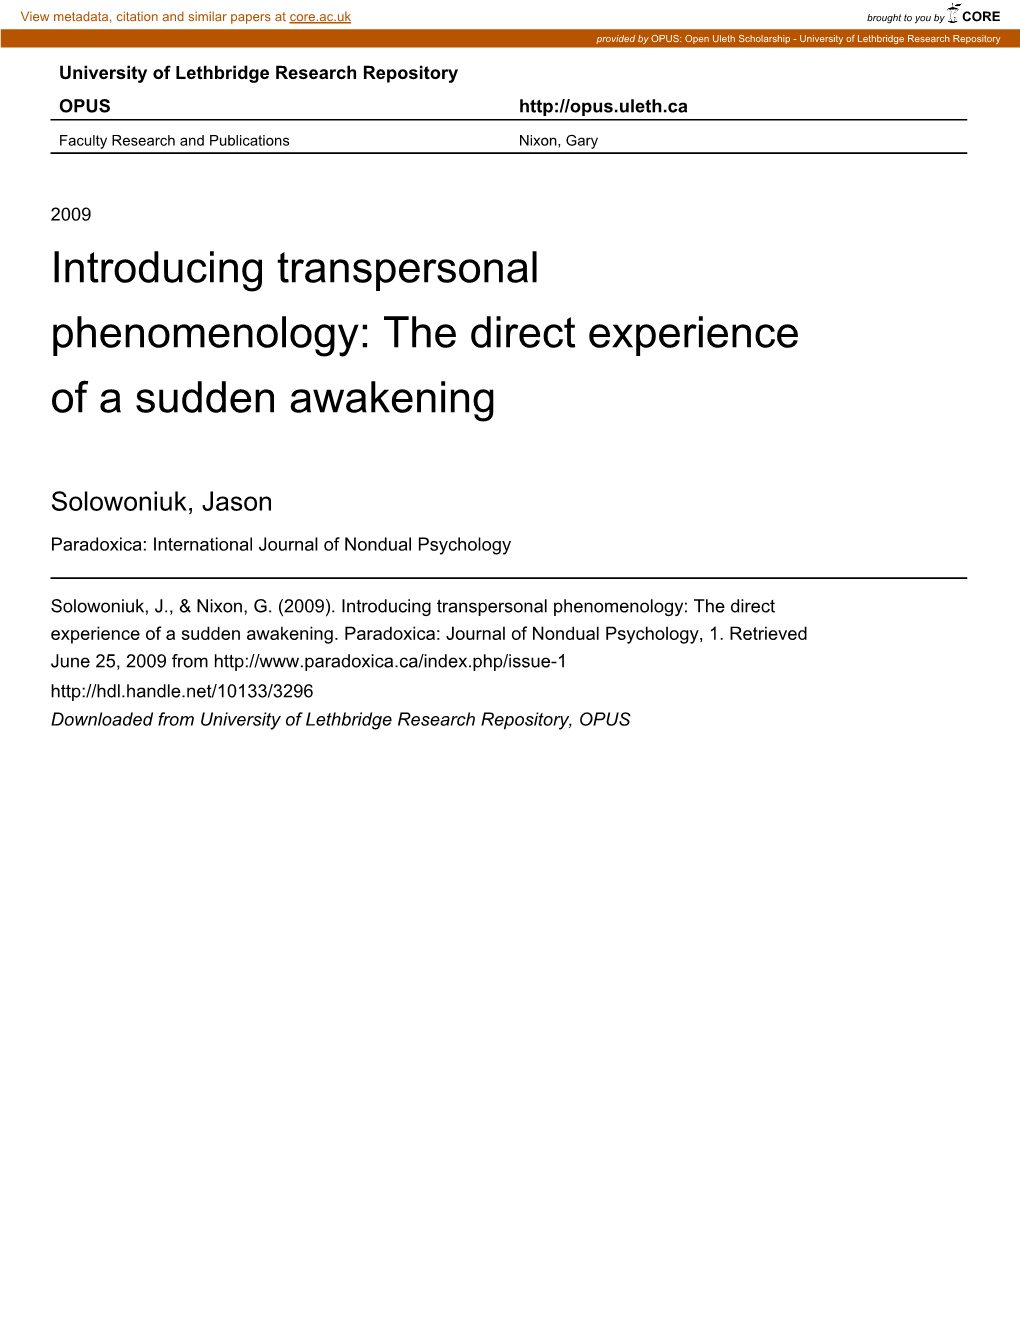 Introducing Transpersonal Phenomenology: the Direct Experience of a Sudden Awakening